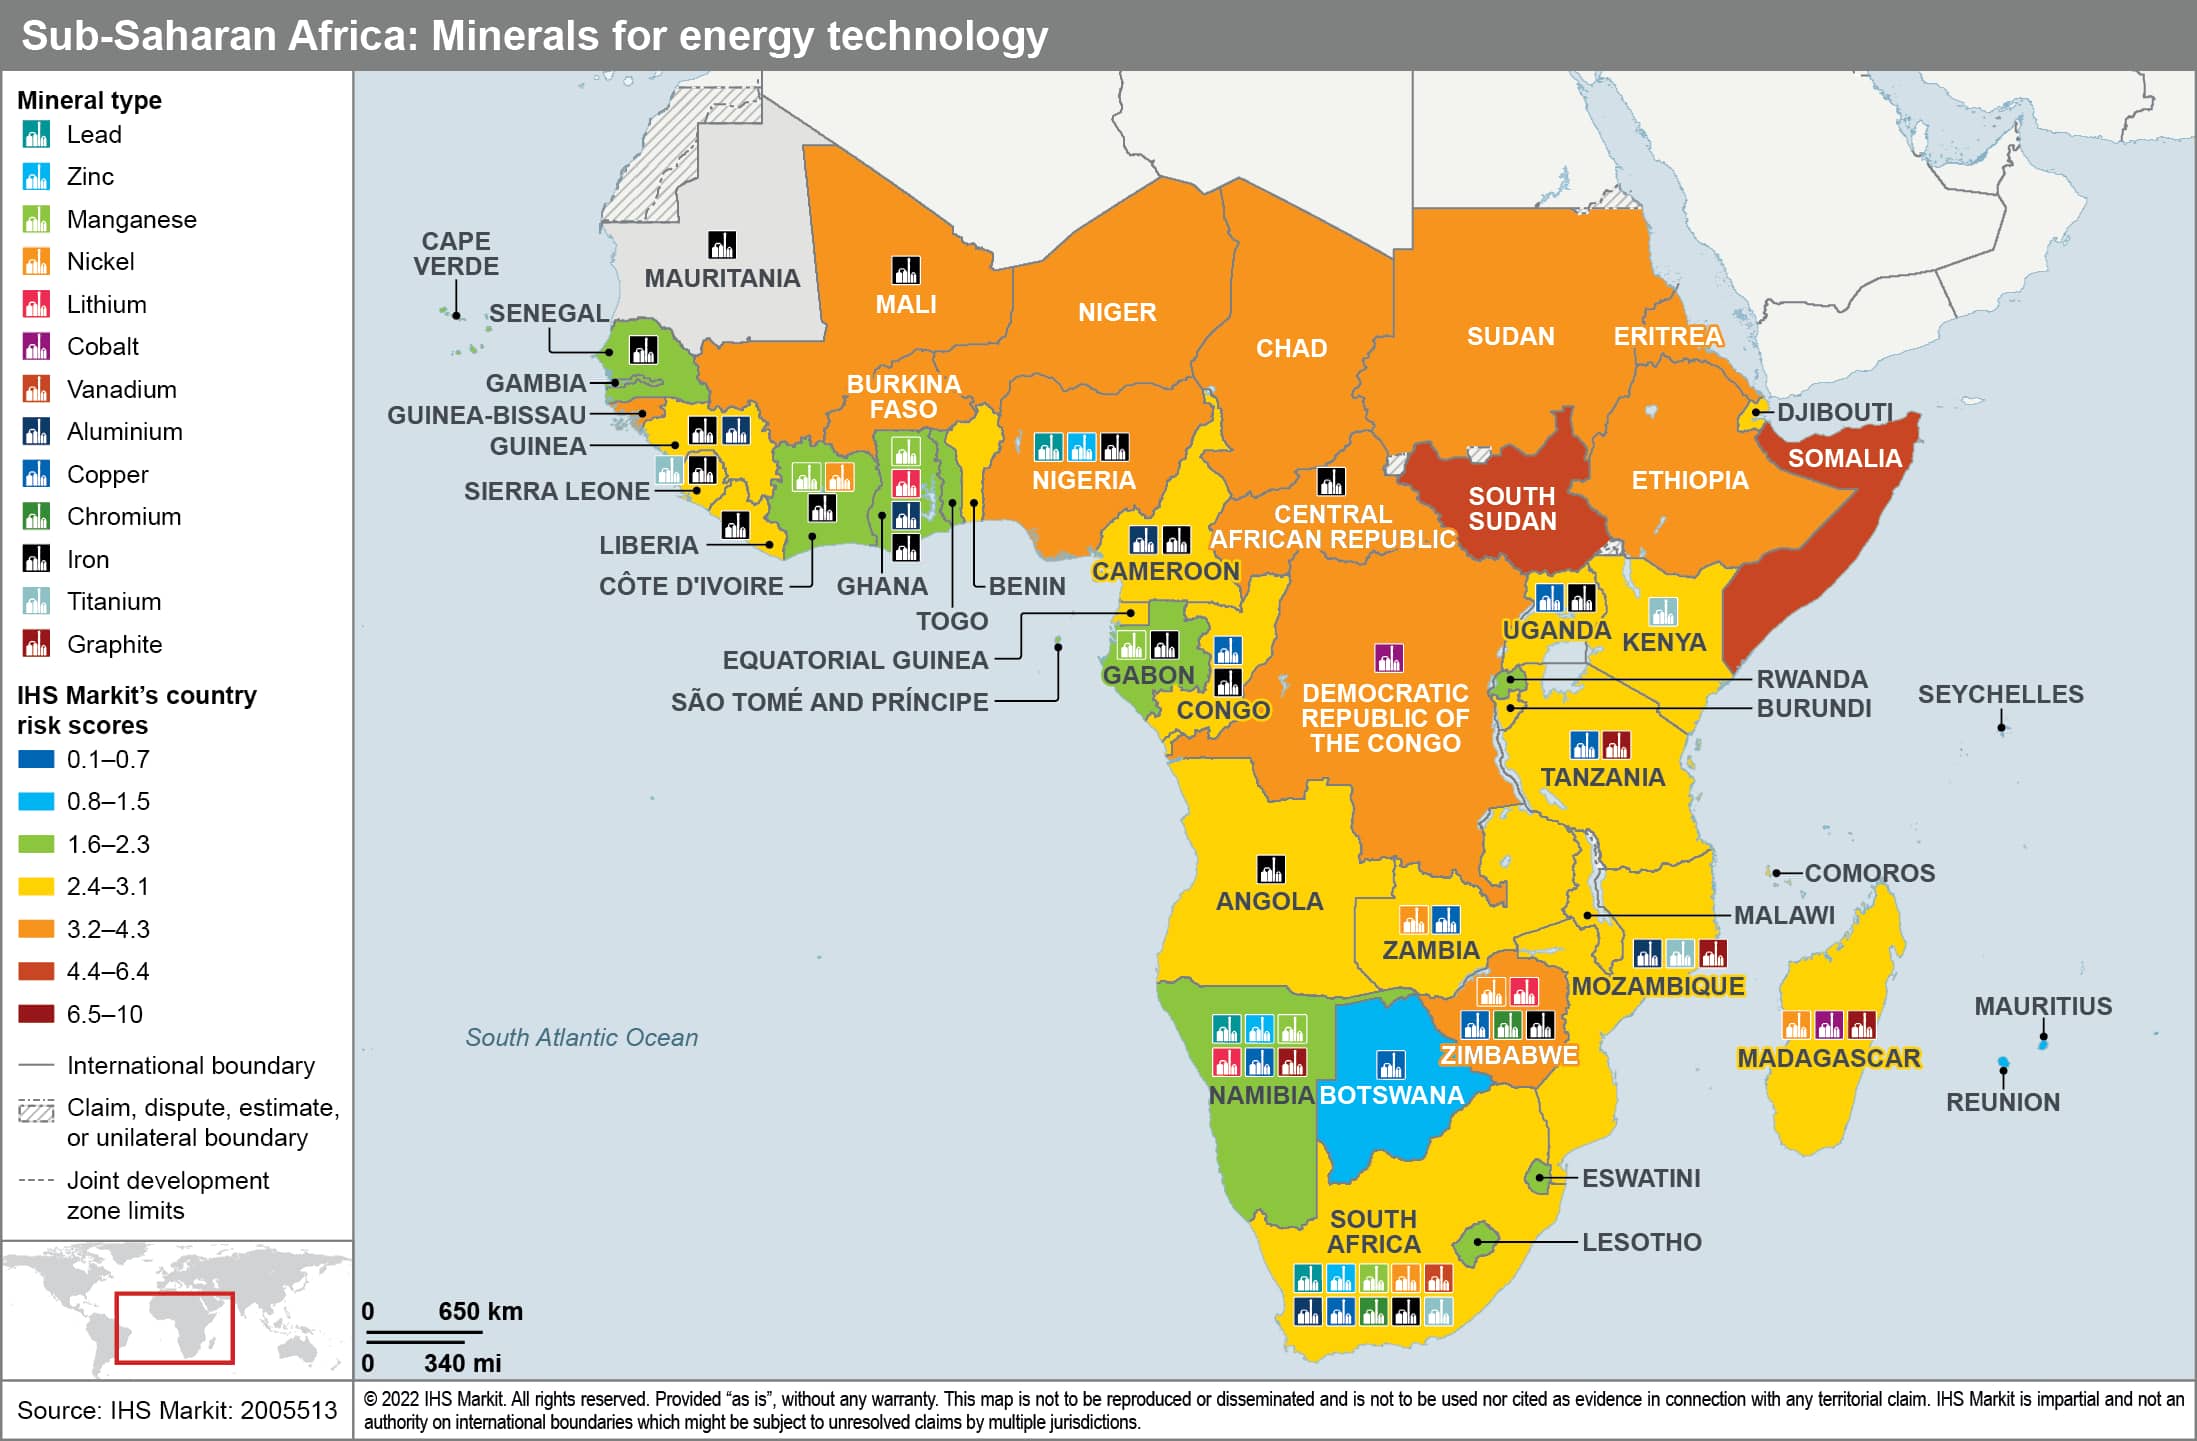 Mapping mineral technology in SSA and critical metals and minerals for the energy transition